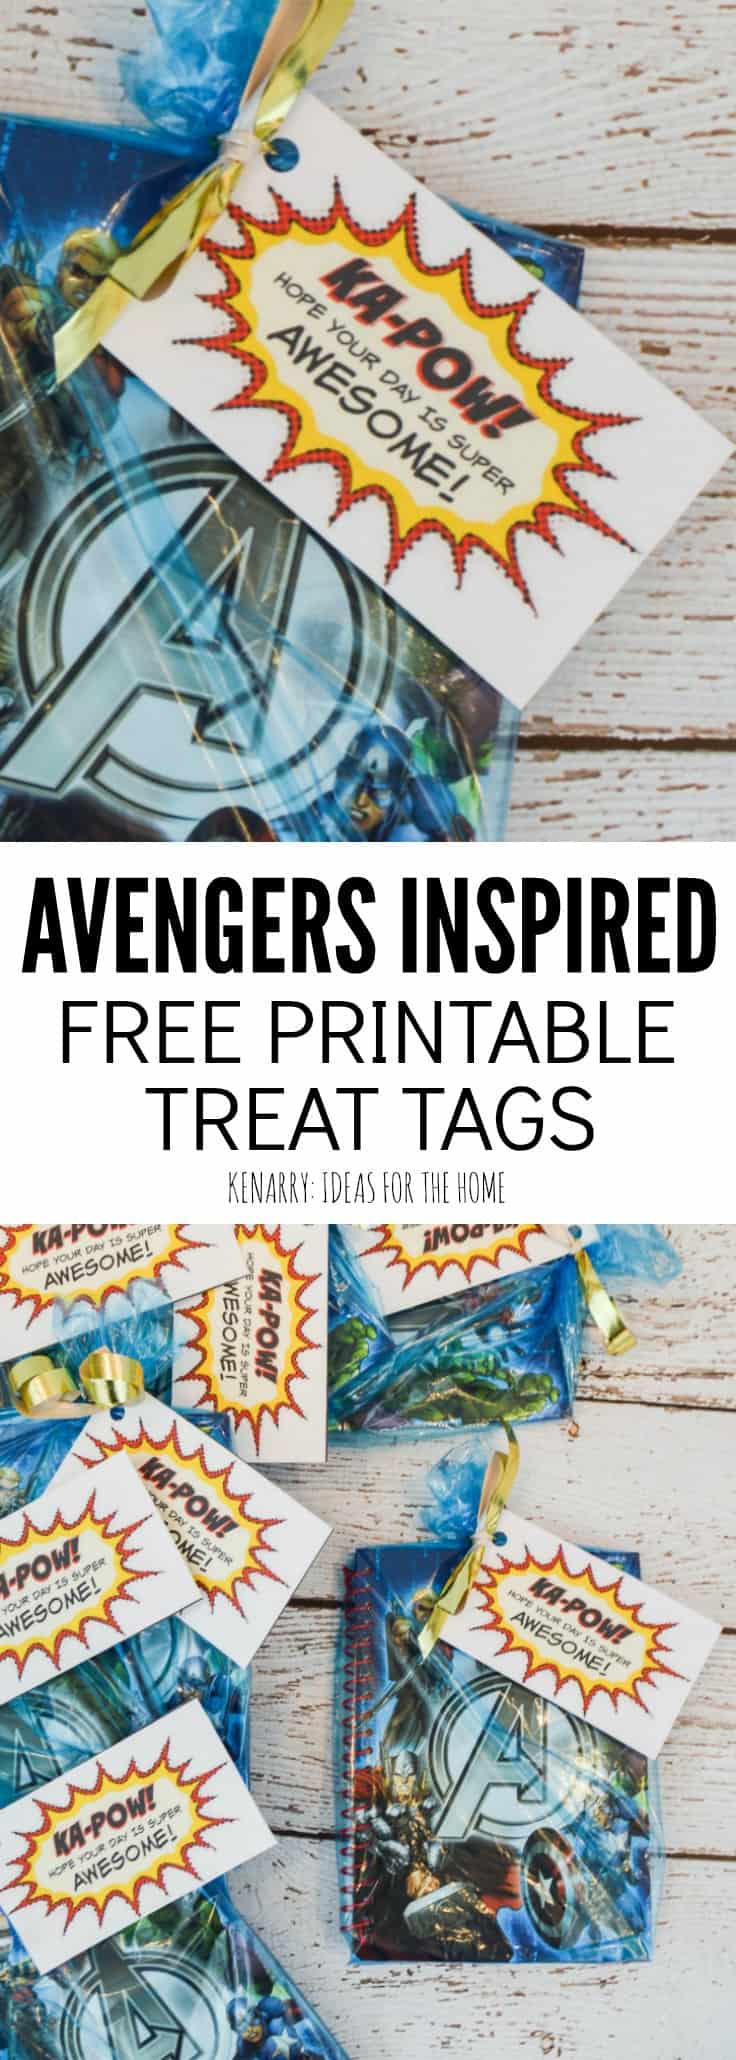 Need Avenger Party Favors for your child's birthday? These free printable party tags can be attached to any gift bag to celebrate a kid that loves Spiderman, Iron Man, Captain America, The Hulk and other Marvel Super Heroes!